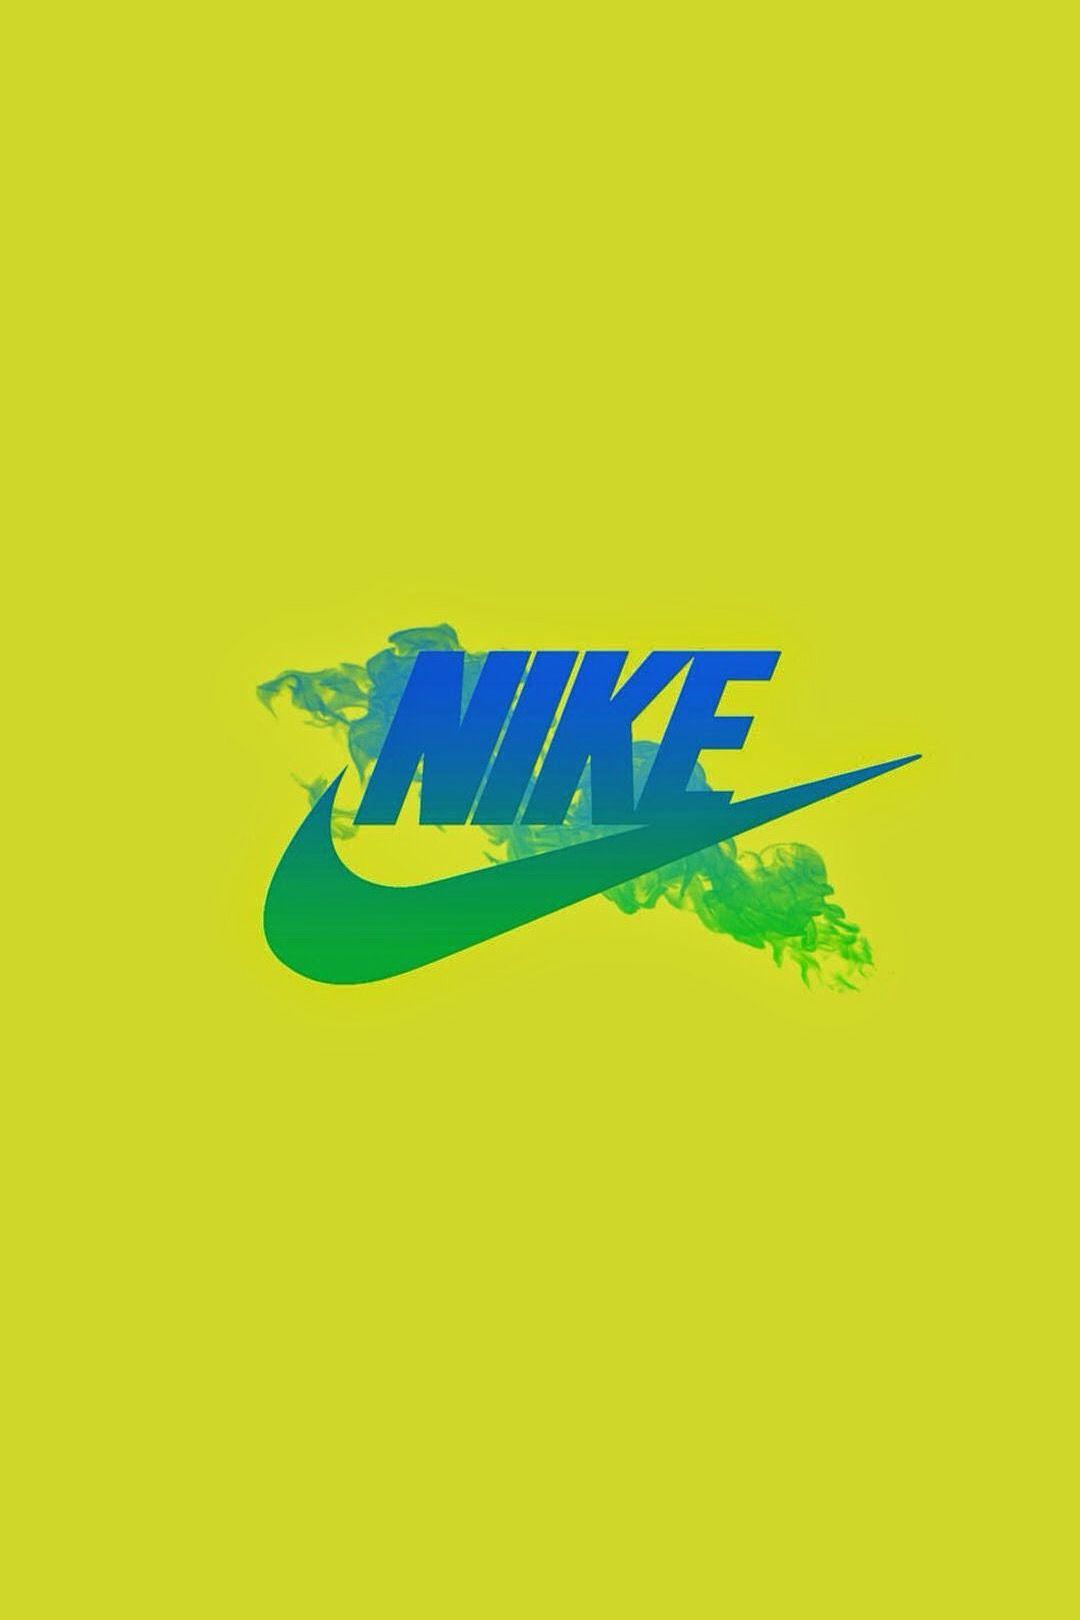 Yellow and Blue Nike Logo - Pin by Drippy Penz on Nike Wallpapers | Pinterest | Nike wallpaper ...